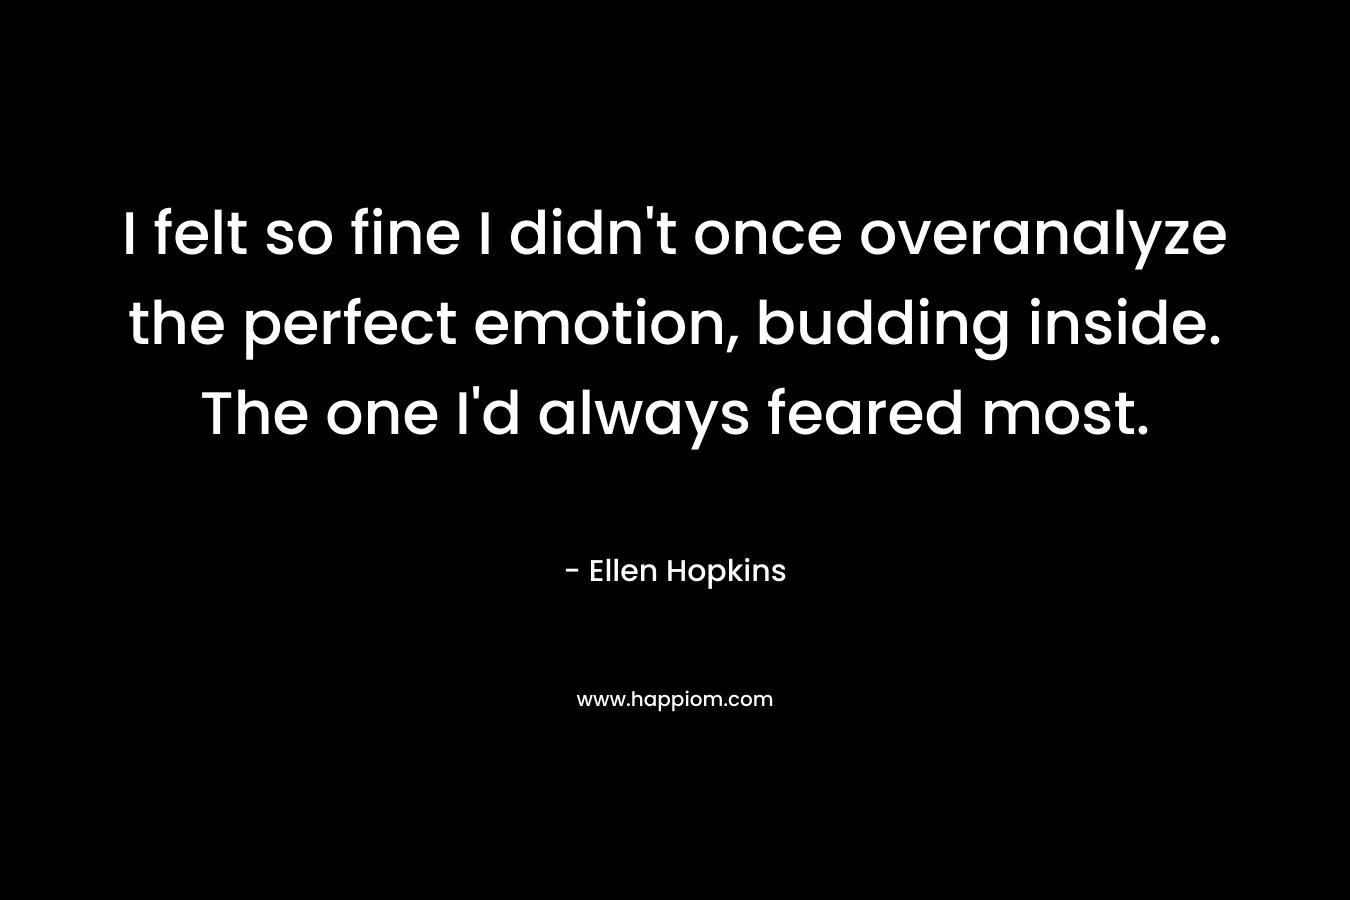 I felt so fine I didn’t once overanalyze the perfect emotion, budding inside. The one I’d always feared most. – Ellen Hopkins